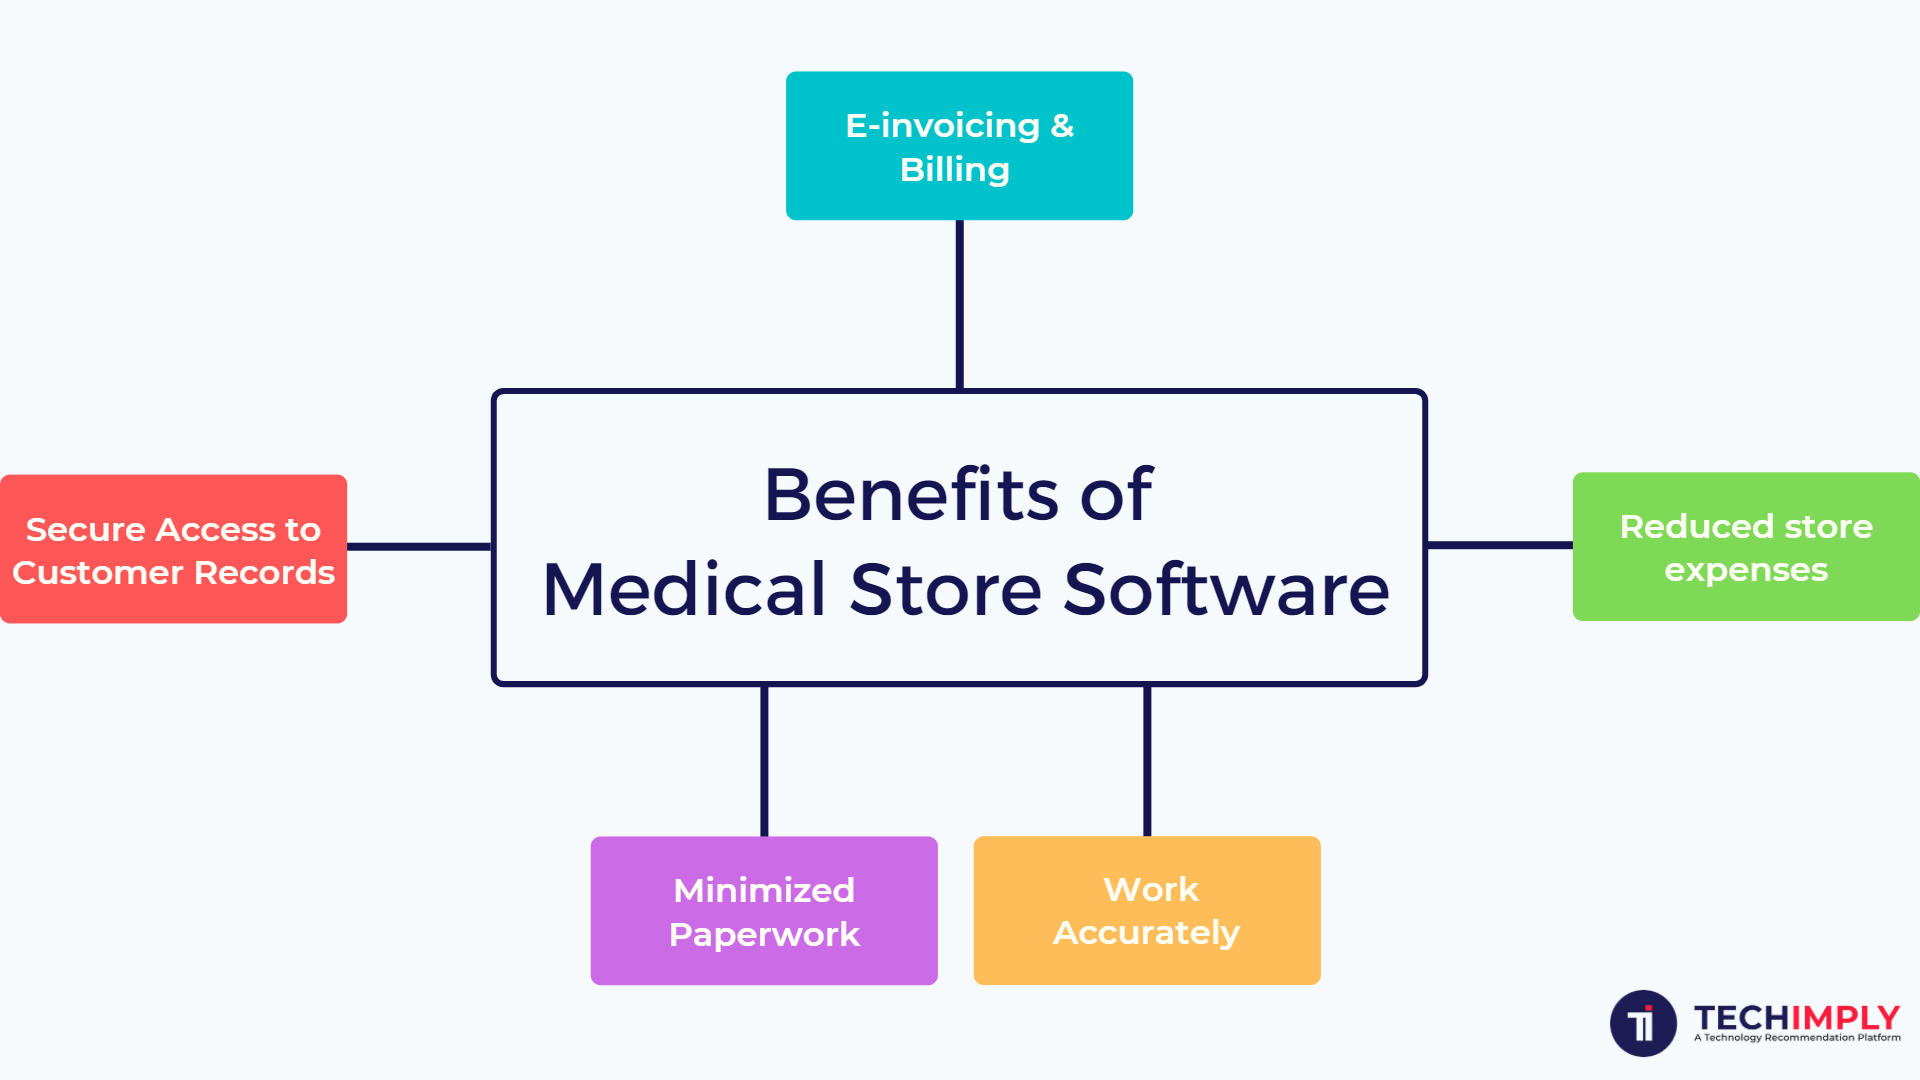 In this image, there is a main key benefits of medical store software. 